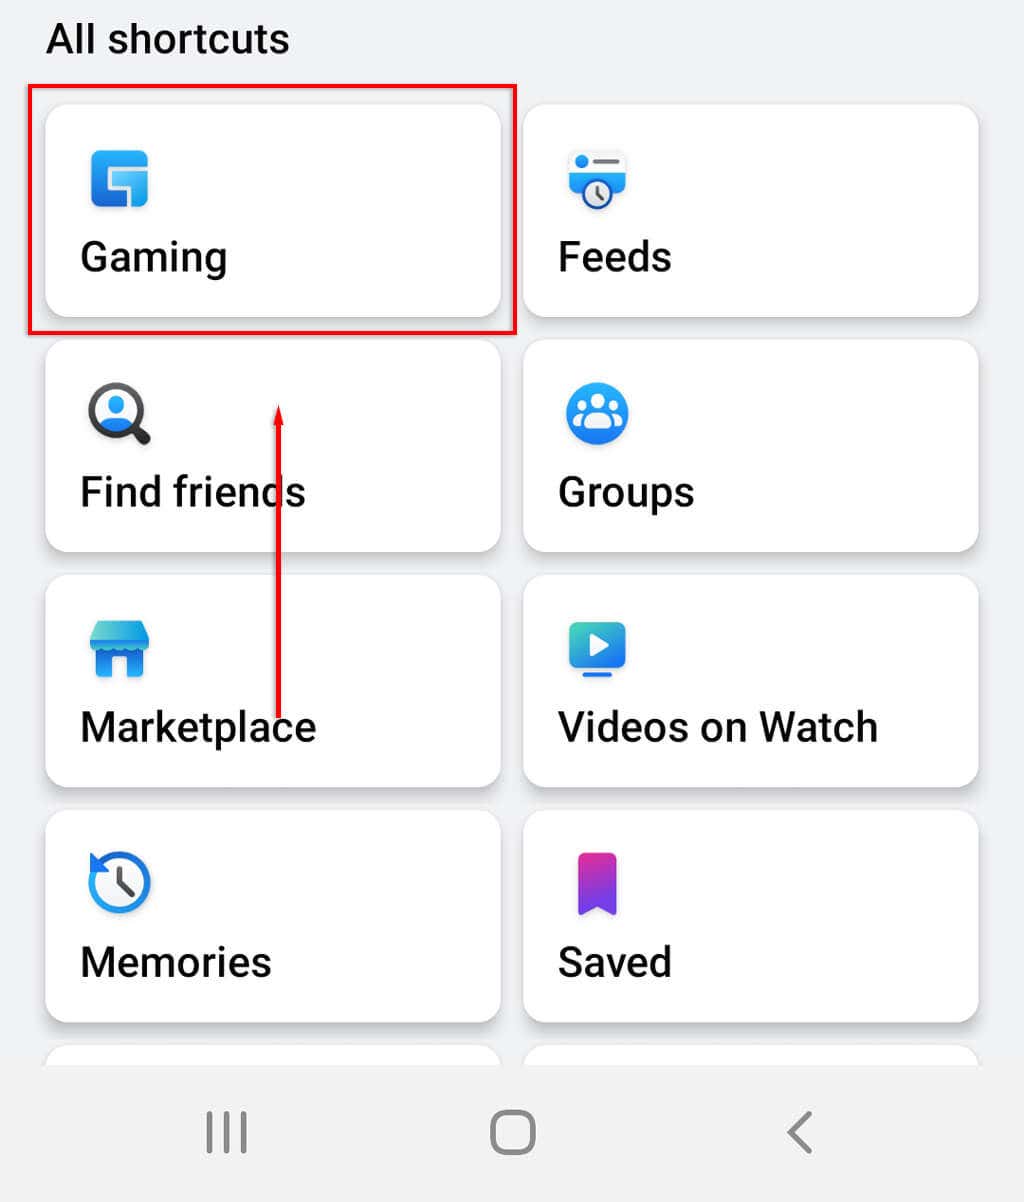 Game On: You Can Now Play Games On Messenger